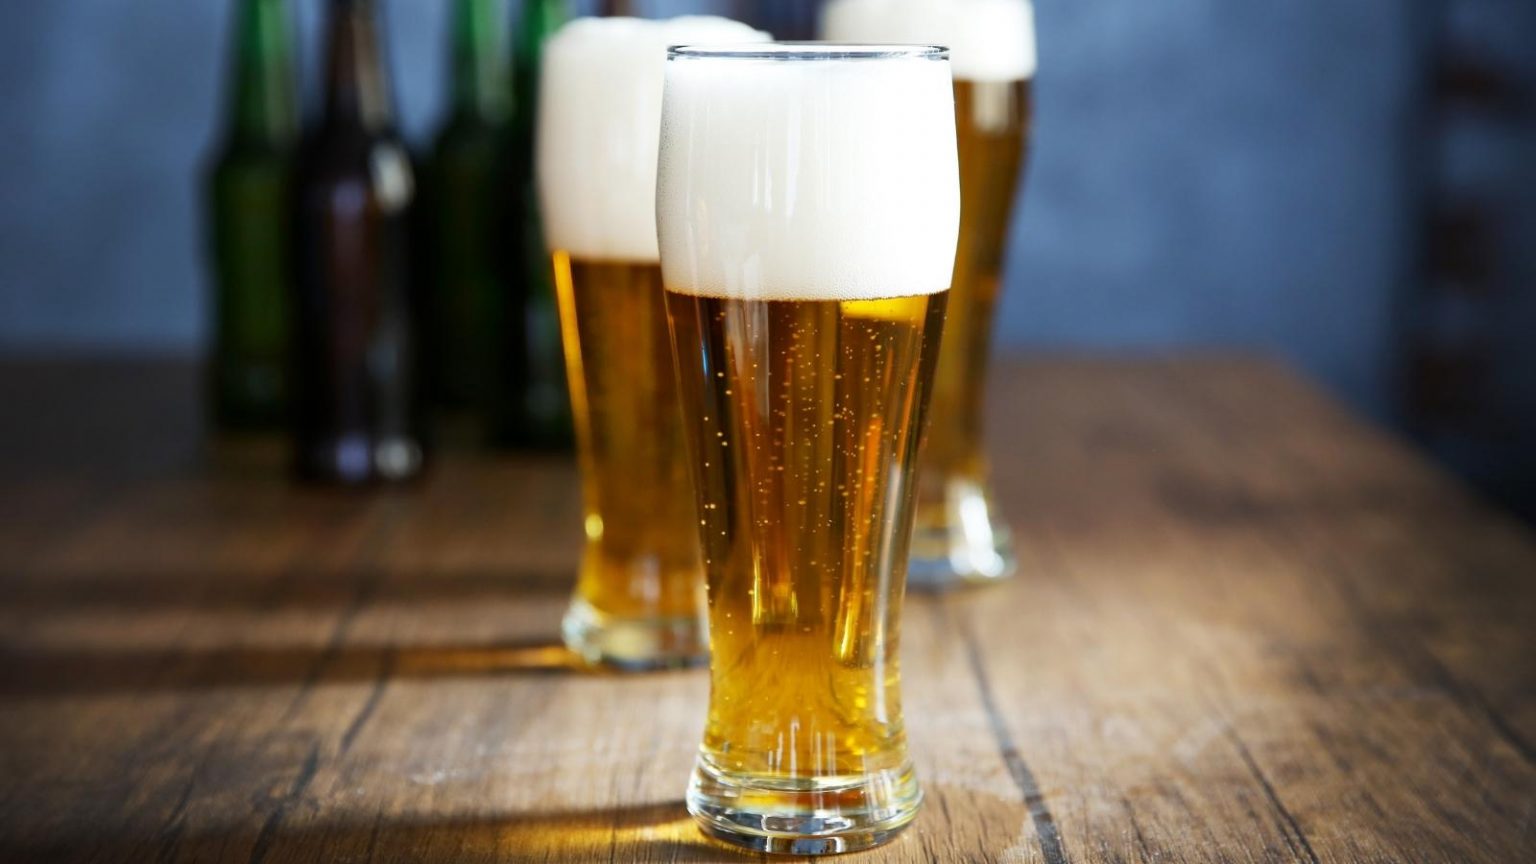 Best Low Alcohol Beer: The Best Options To Cut Alcohol Intake